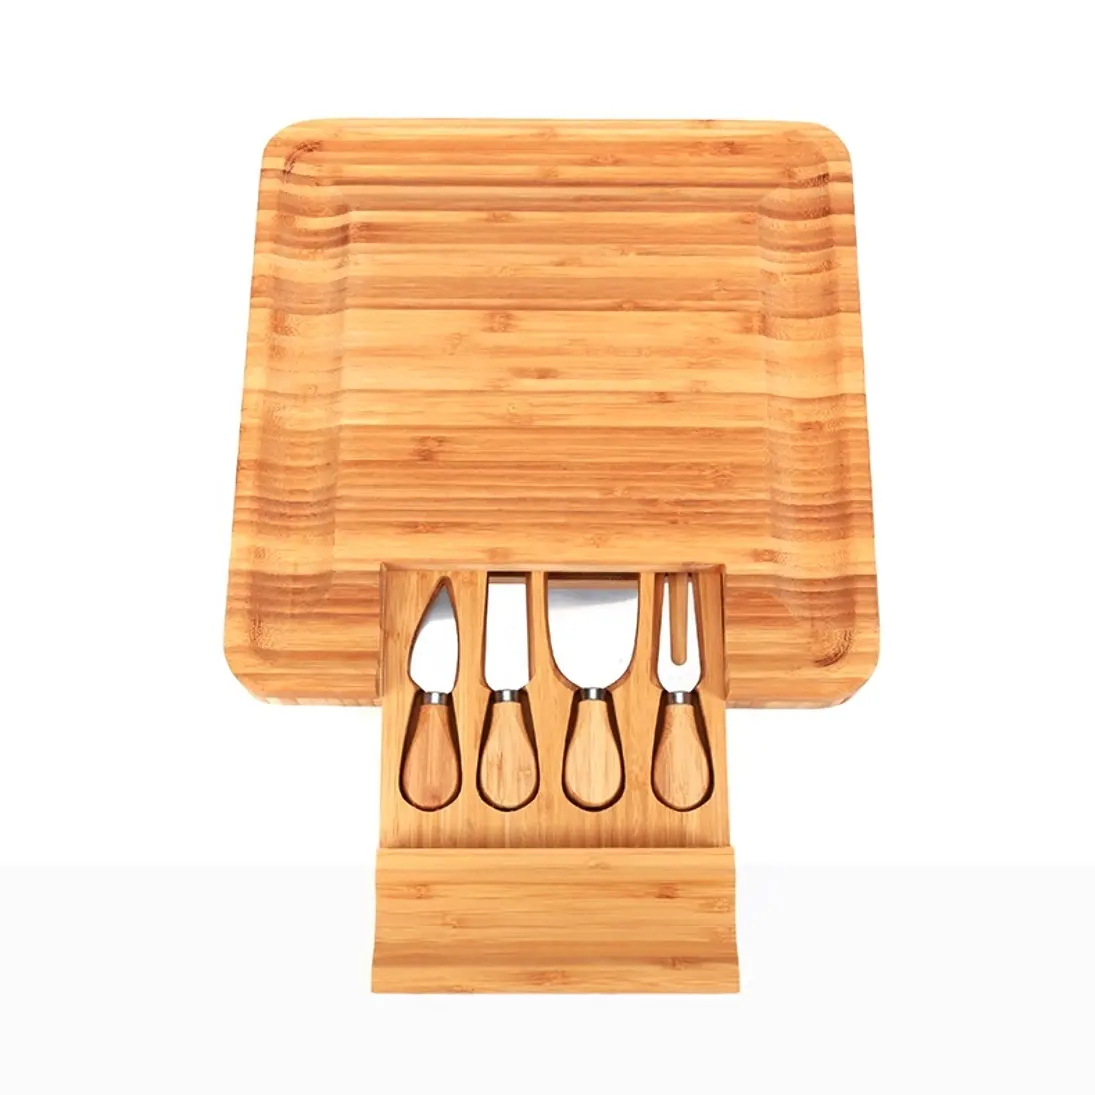 Cheese Board And Cutlery Set Bamboo Cheese Board Set With Cutlery In Slide-Out Drawer Charcuterie Platter And Serving Meat Board Cheese Tray Unique Gifts